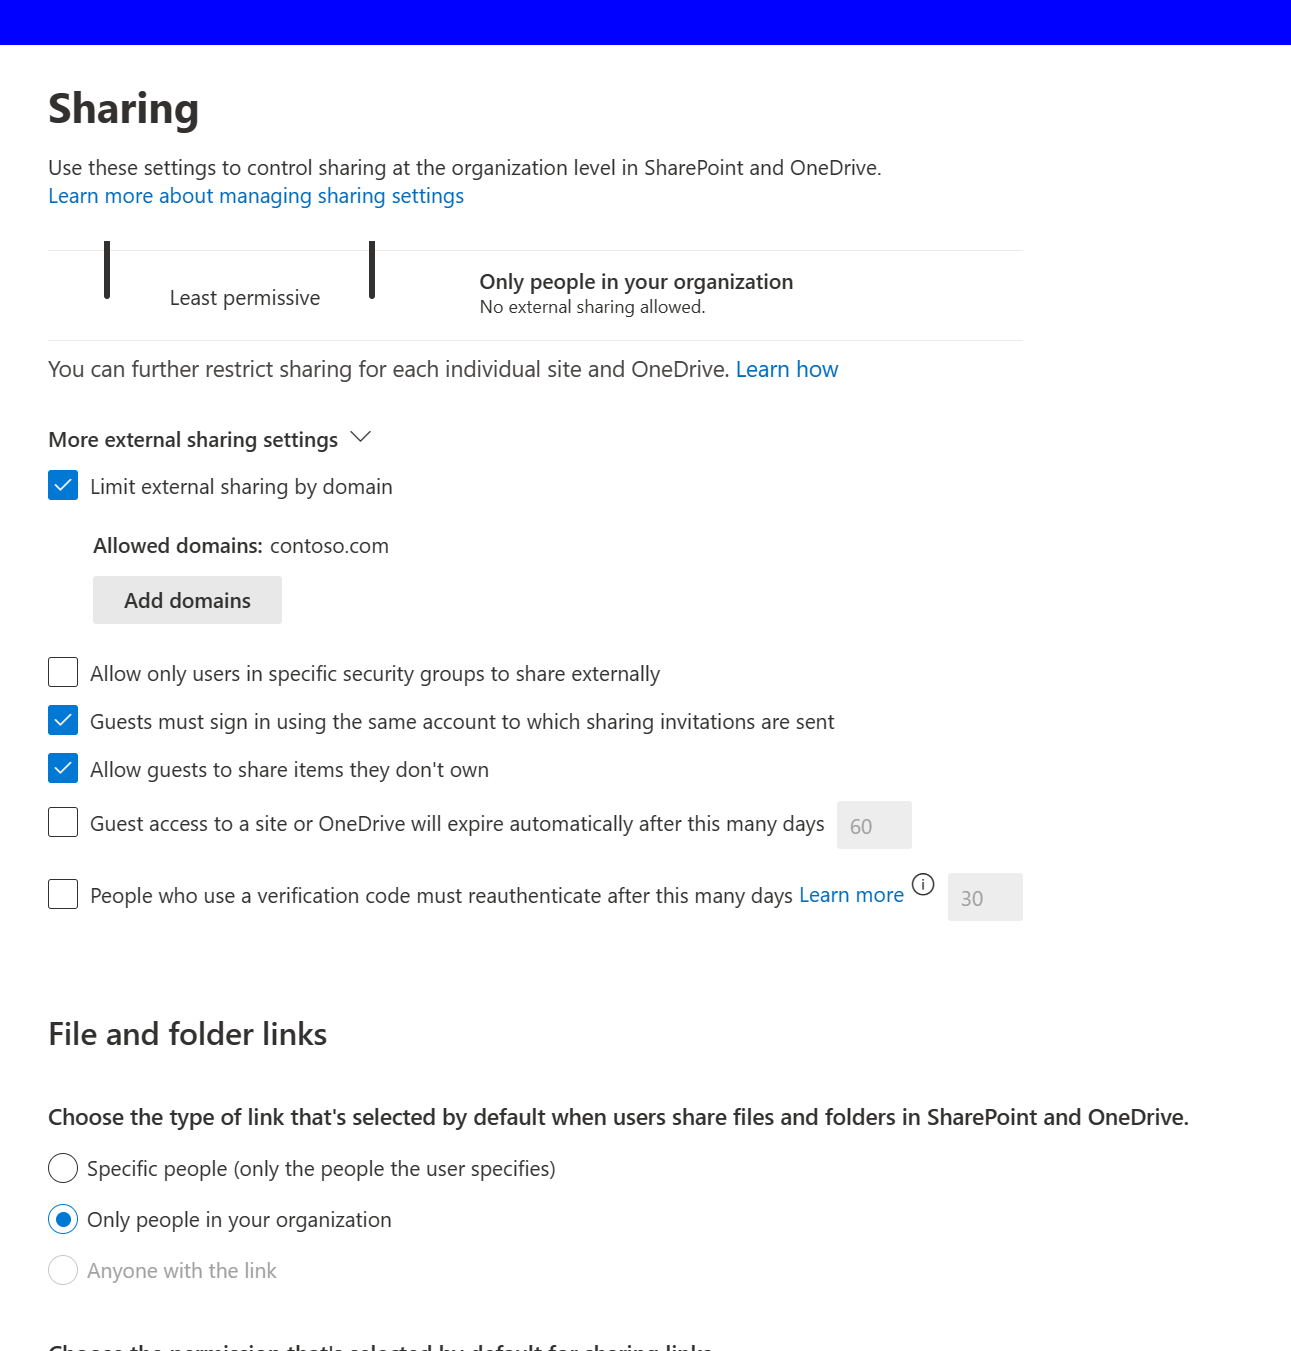 image from Empowering Secure Collaboration: Configuring OneDrive Sharing Tenant and Site Settings with PowerShell to prevent oversharing